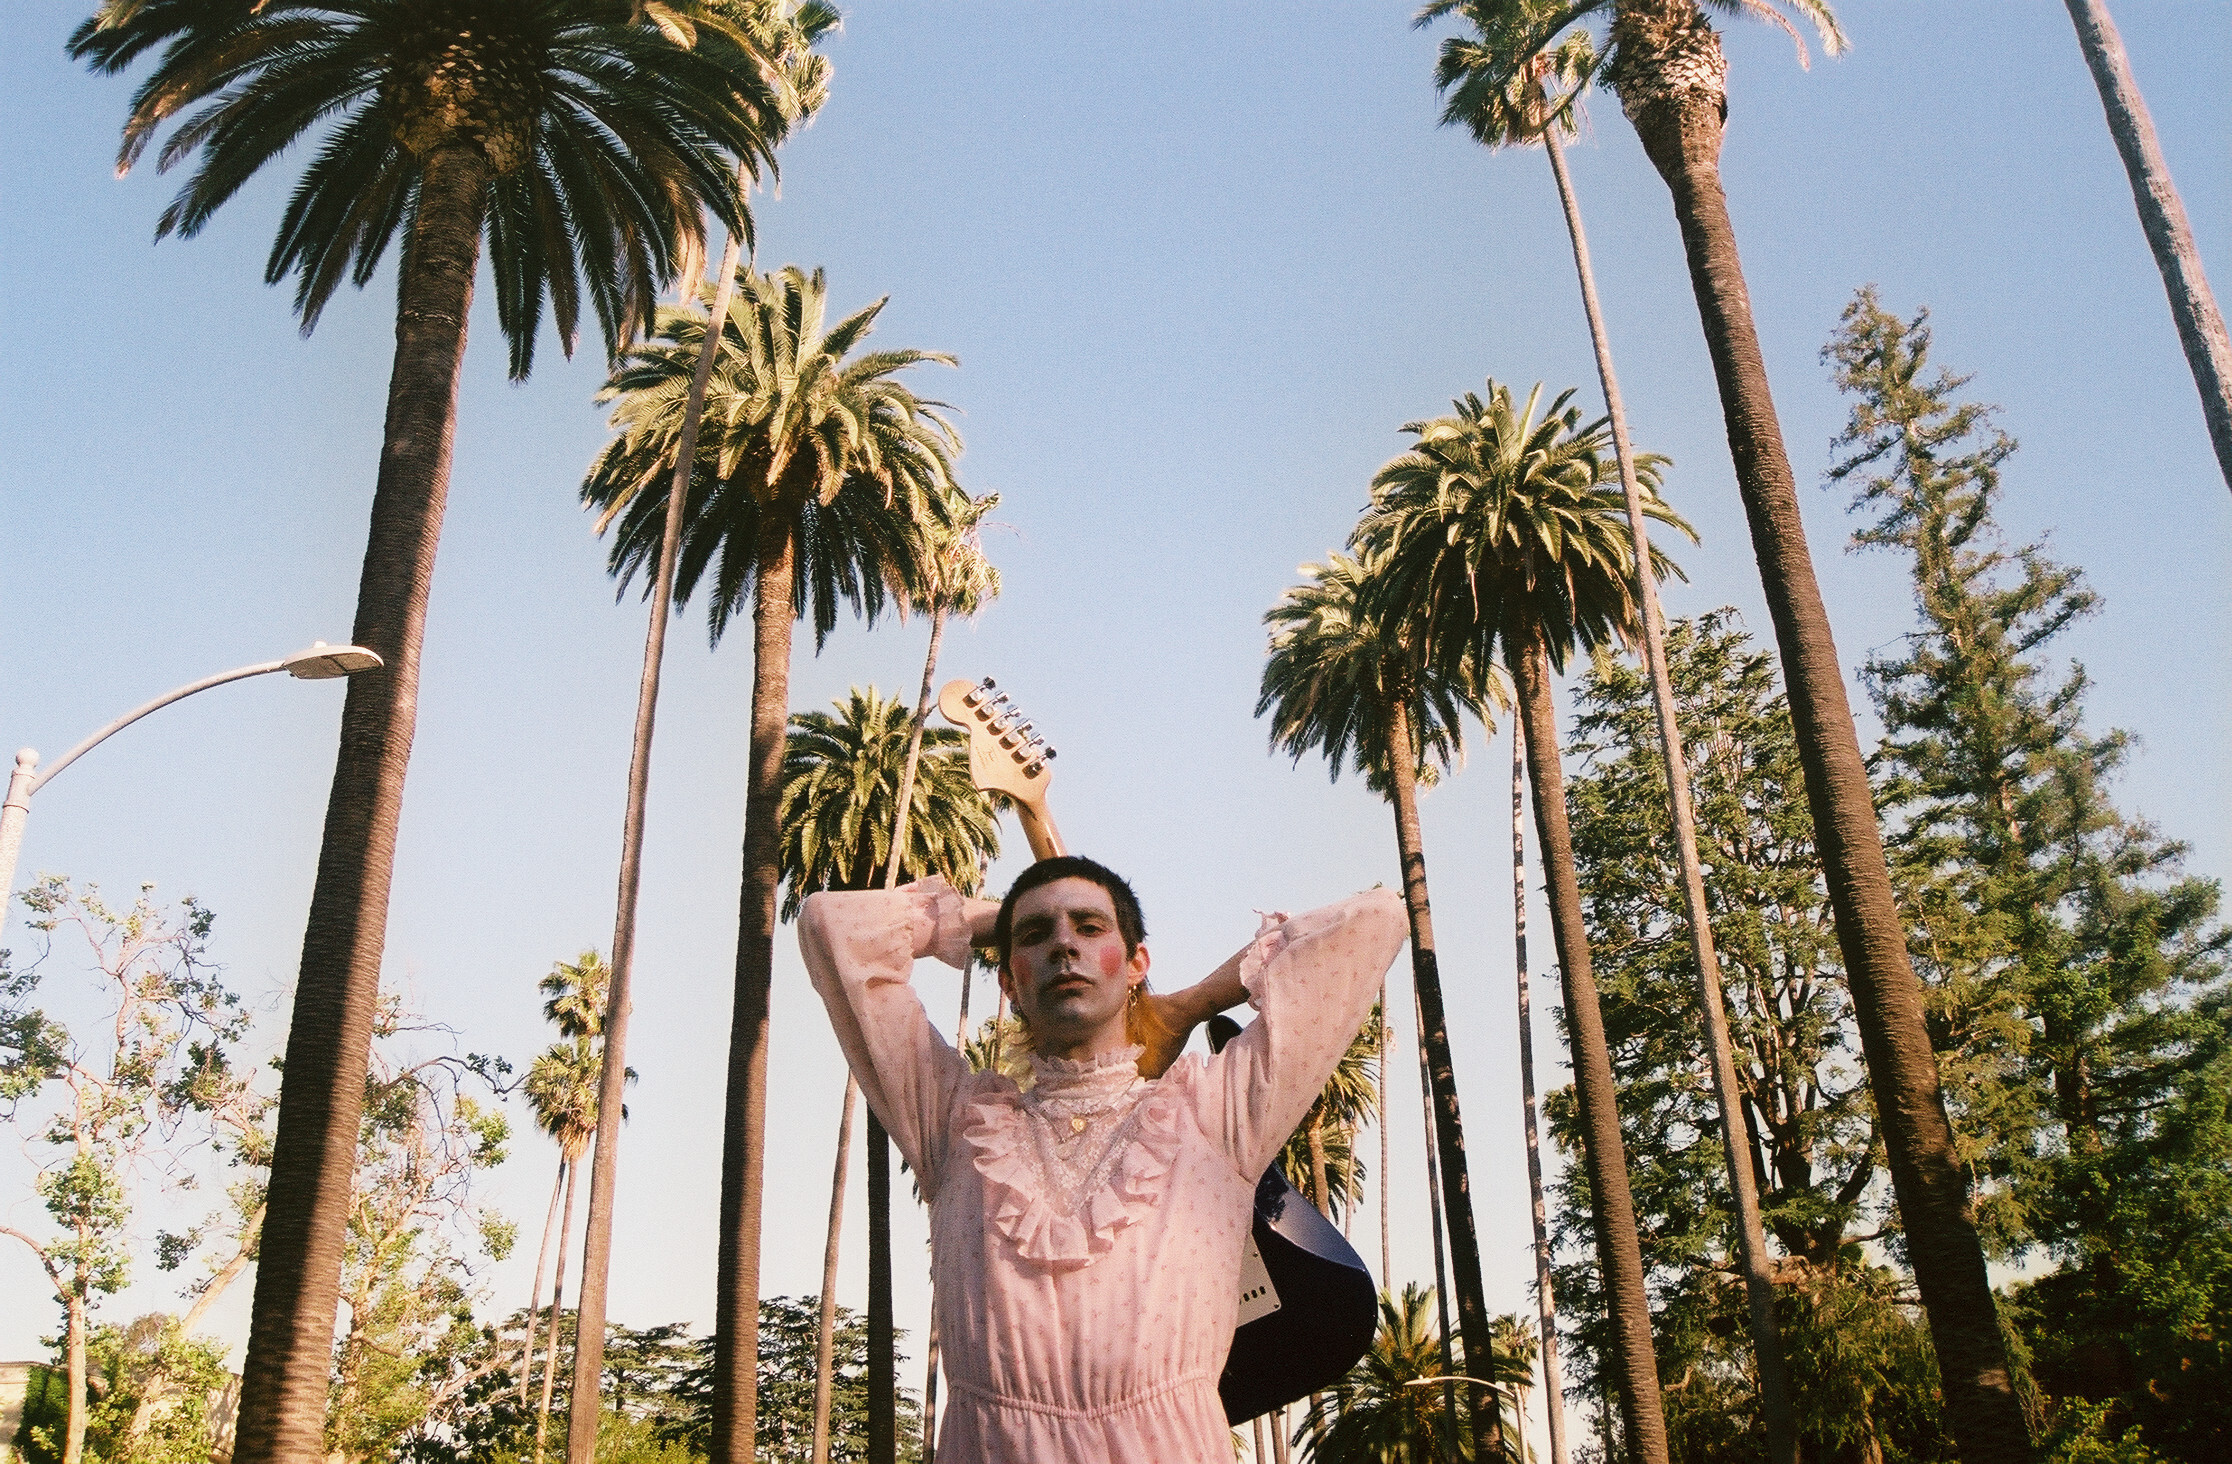 Emerson Snowe Releases New EP ‘Emerson Snowe’s Splatterpunk’ + Drops Video For EP Track ‘Man, It Don’t Matter (What They Say)’